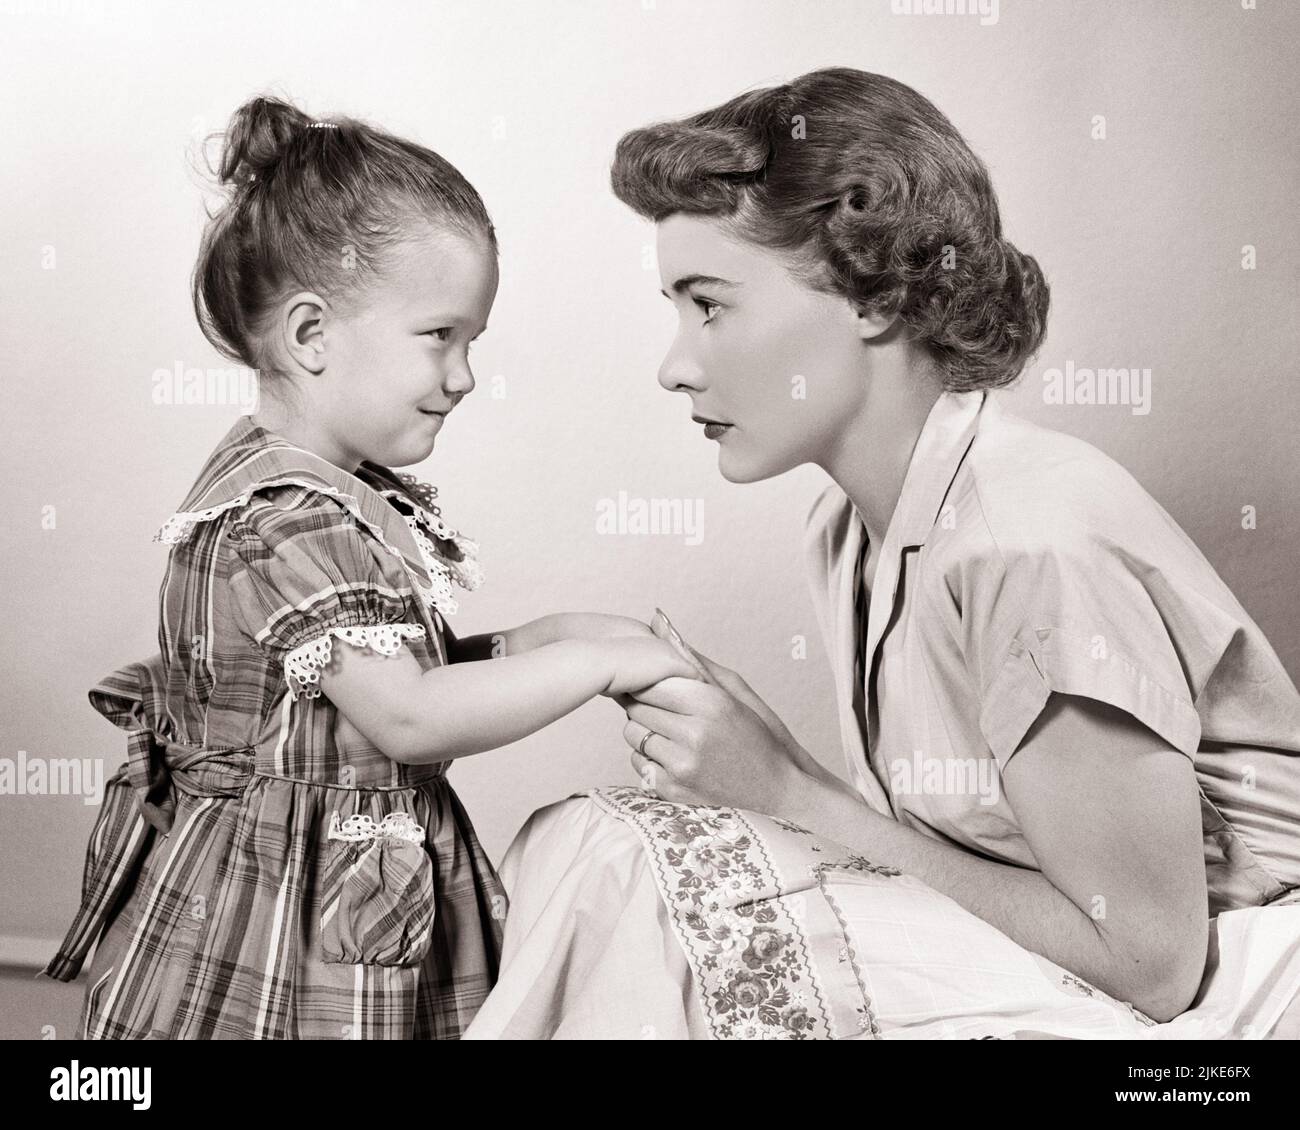 1940s 1950s Woman Mother Having A Serious Face To Face Talk With Her